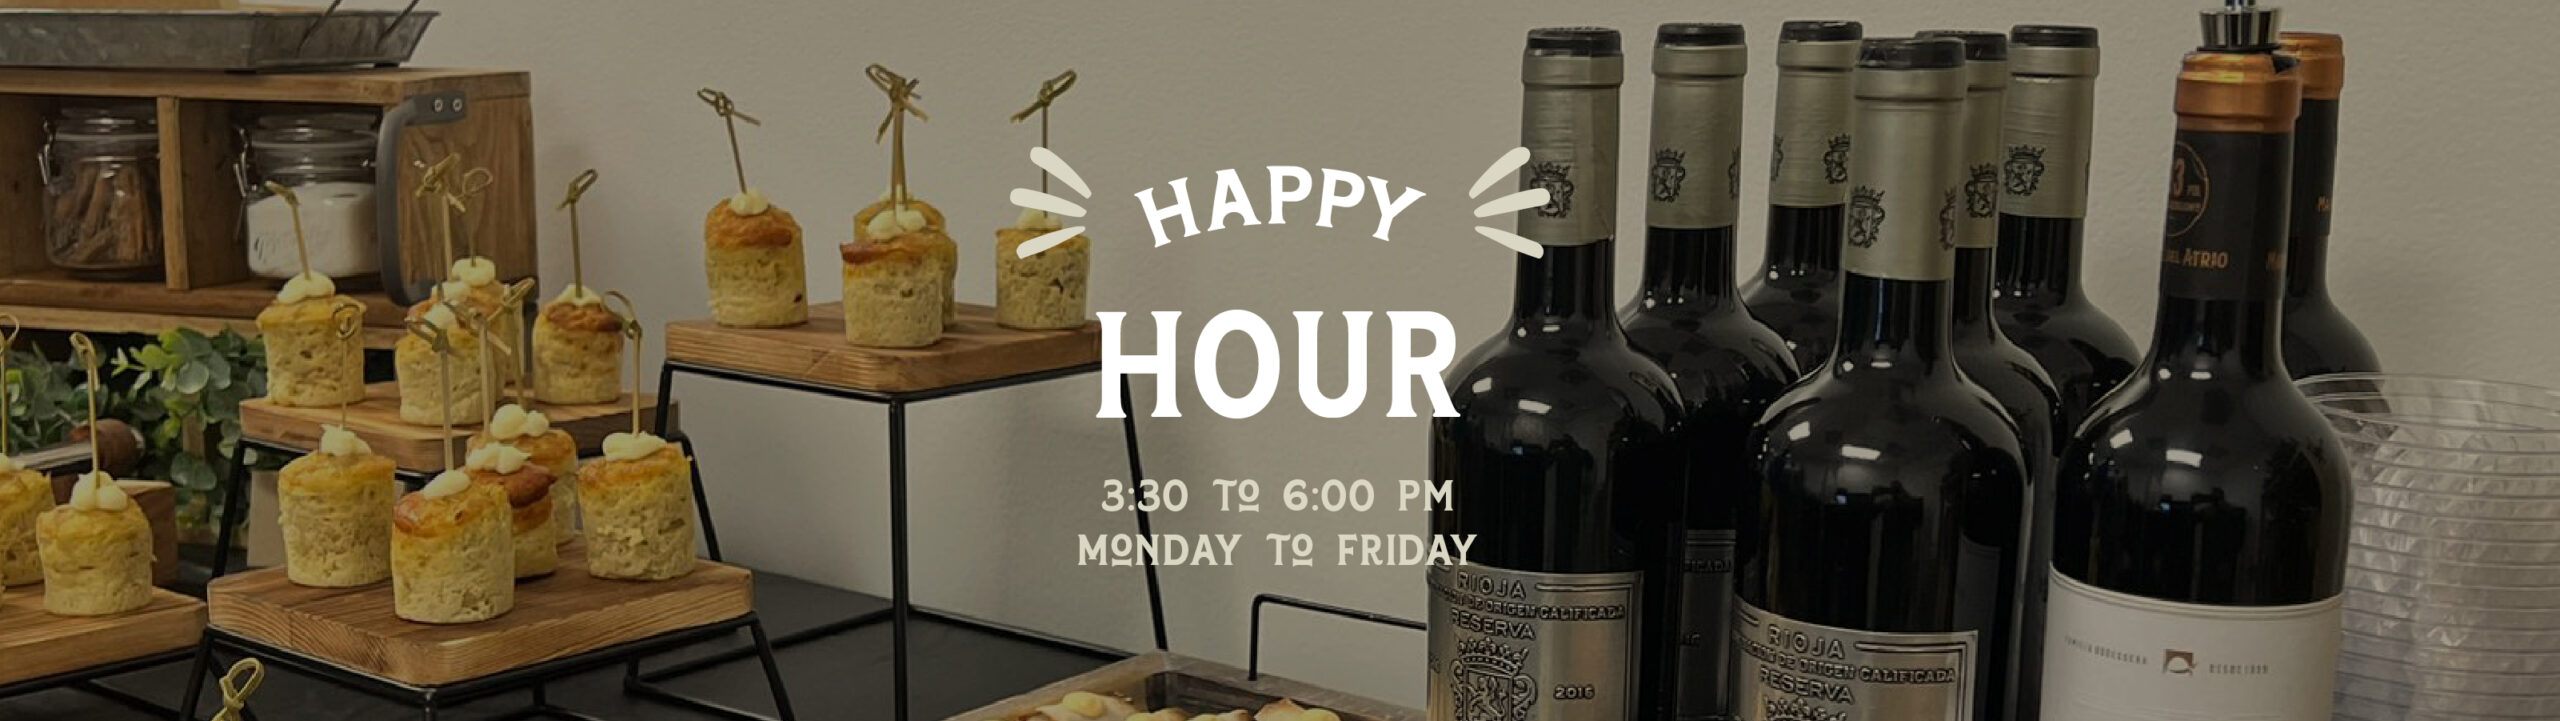 BANNER-CALAMILLOR-_Happy Hour